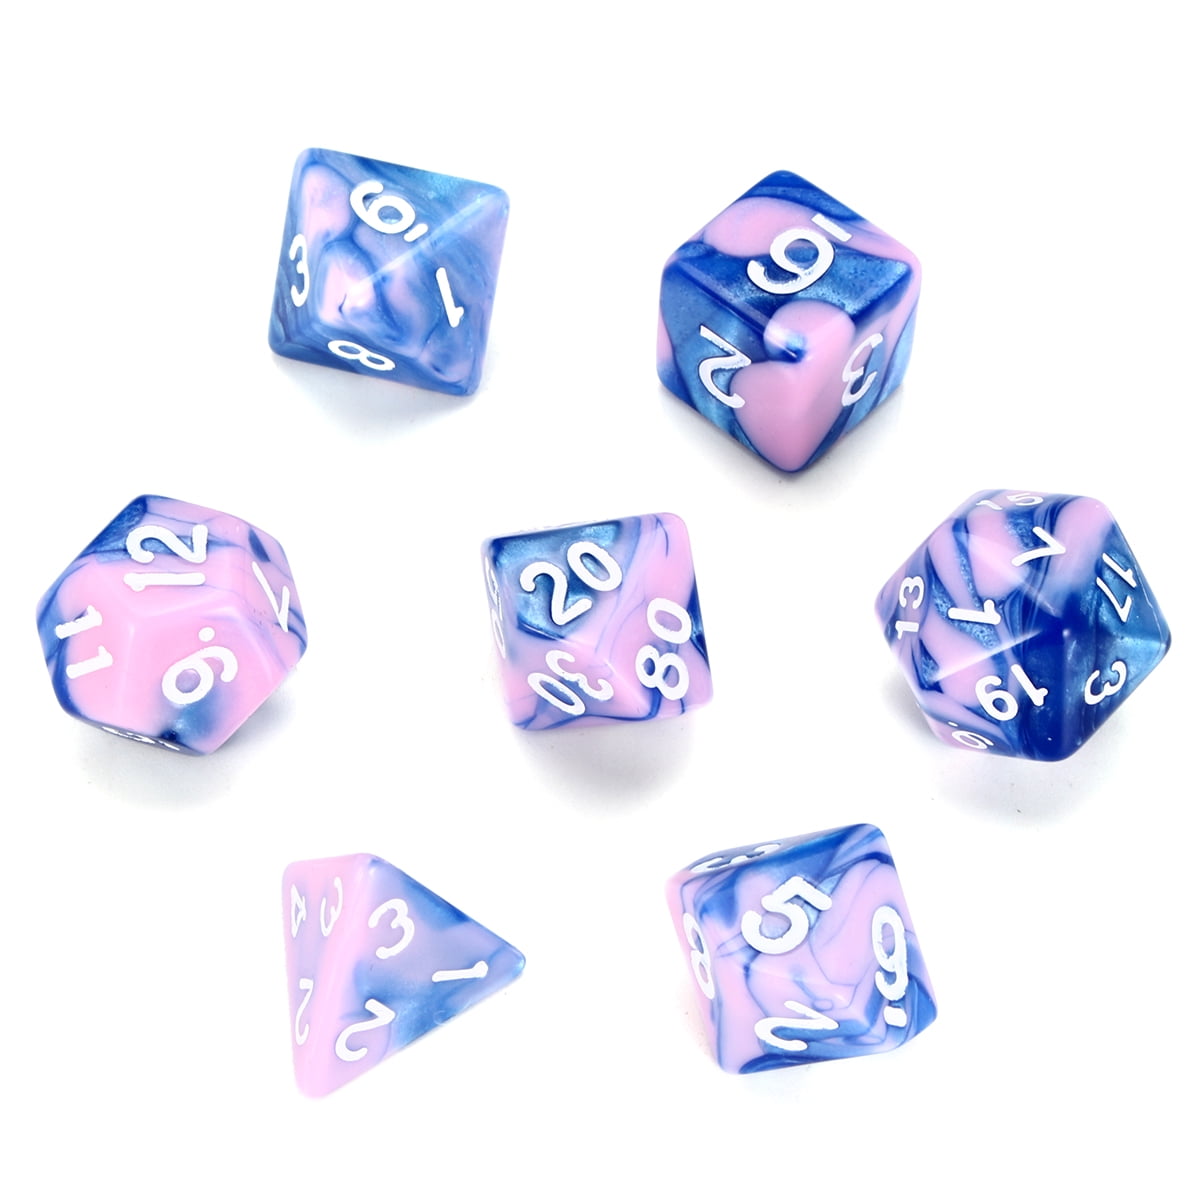 42 Pieces Polyhedral Dice Set Multisided Dices Role Playing Games Gadget 